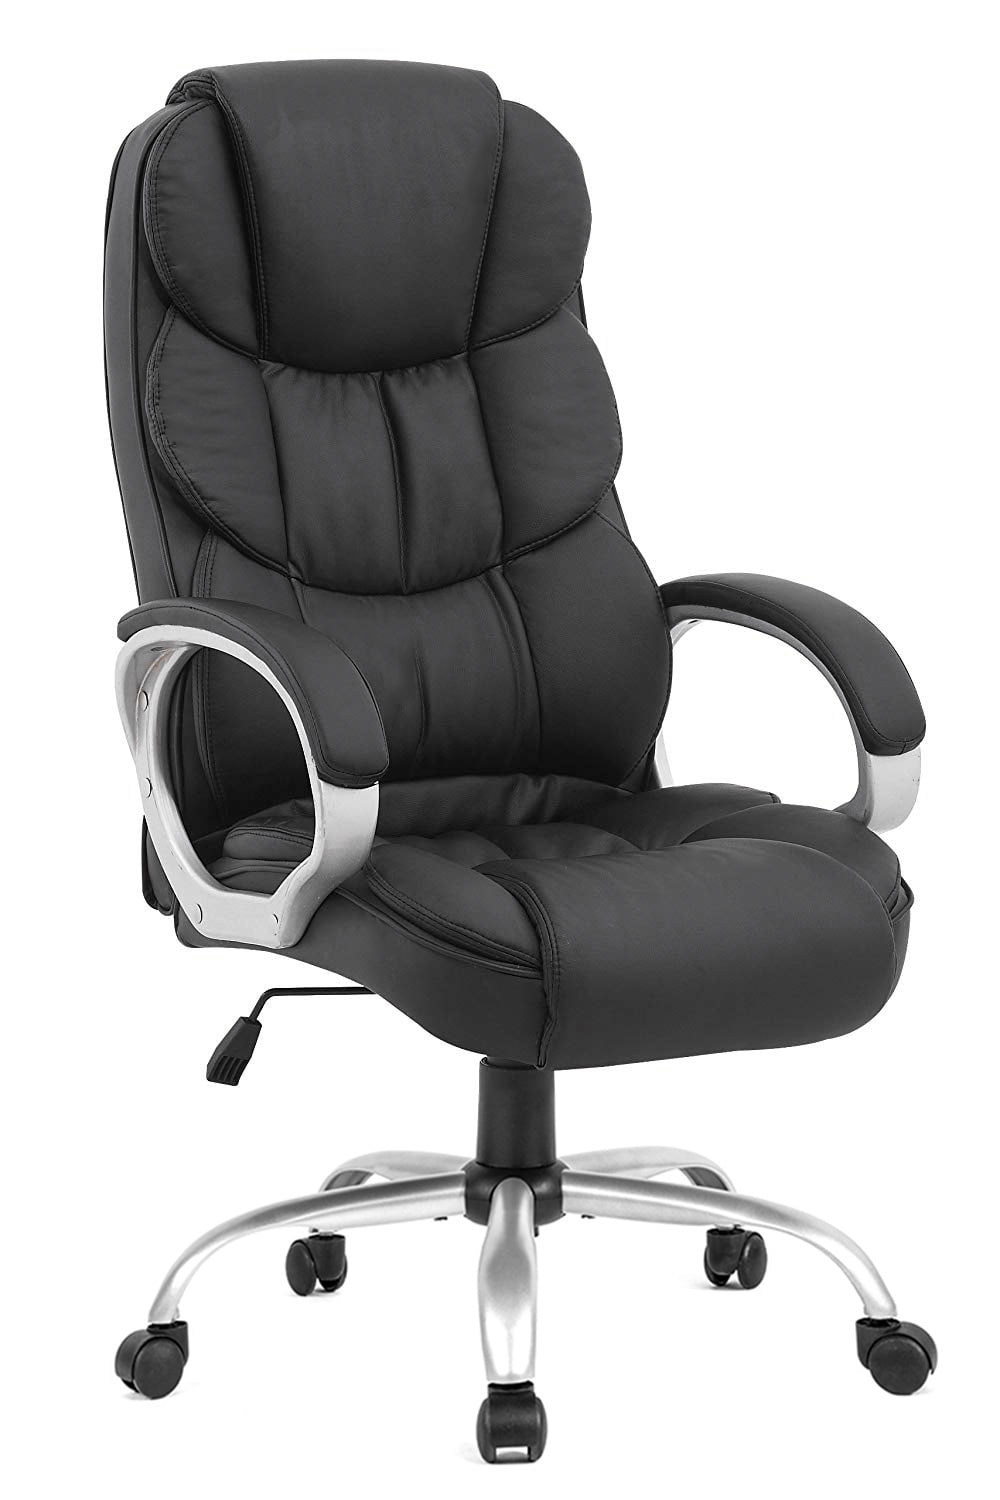 New Office Chair Gaming Chair Desk Ergonomic Leather Computer Chair w Metal Base 